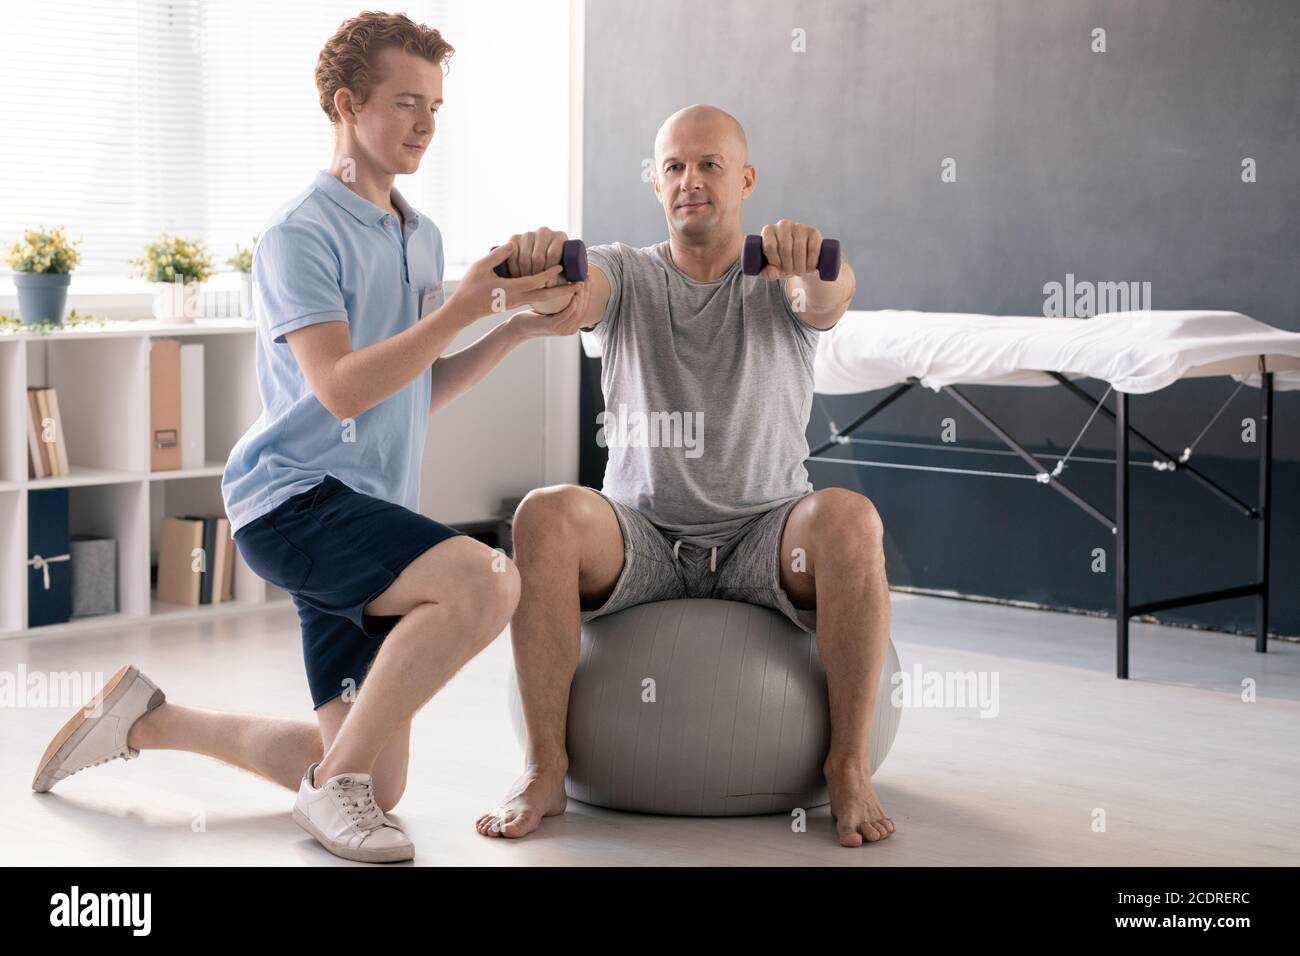 Young physiotherapist in casualwear helping male patient to do exercise Stock Photo